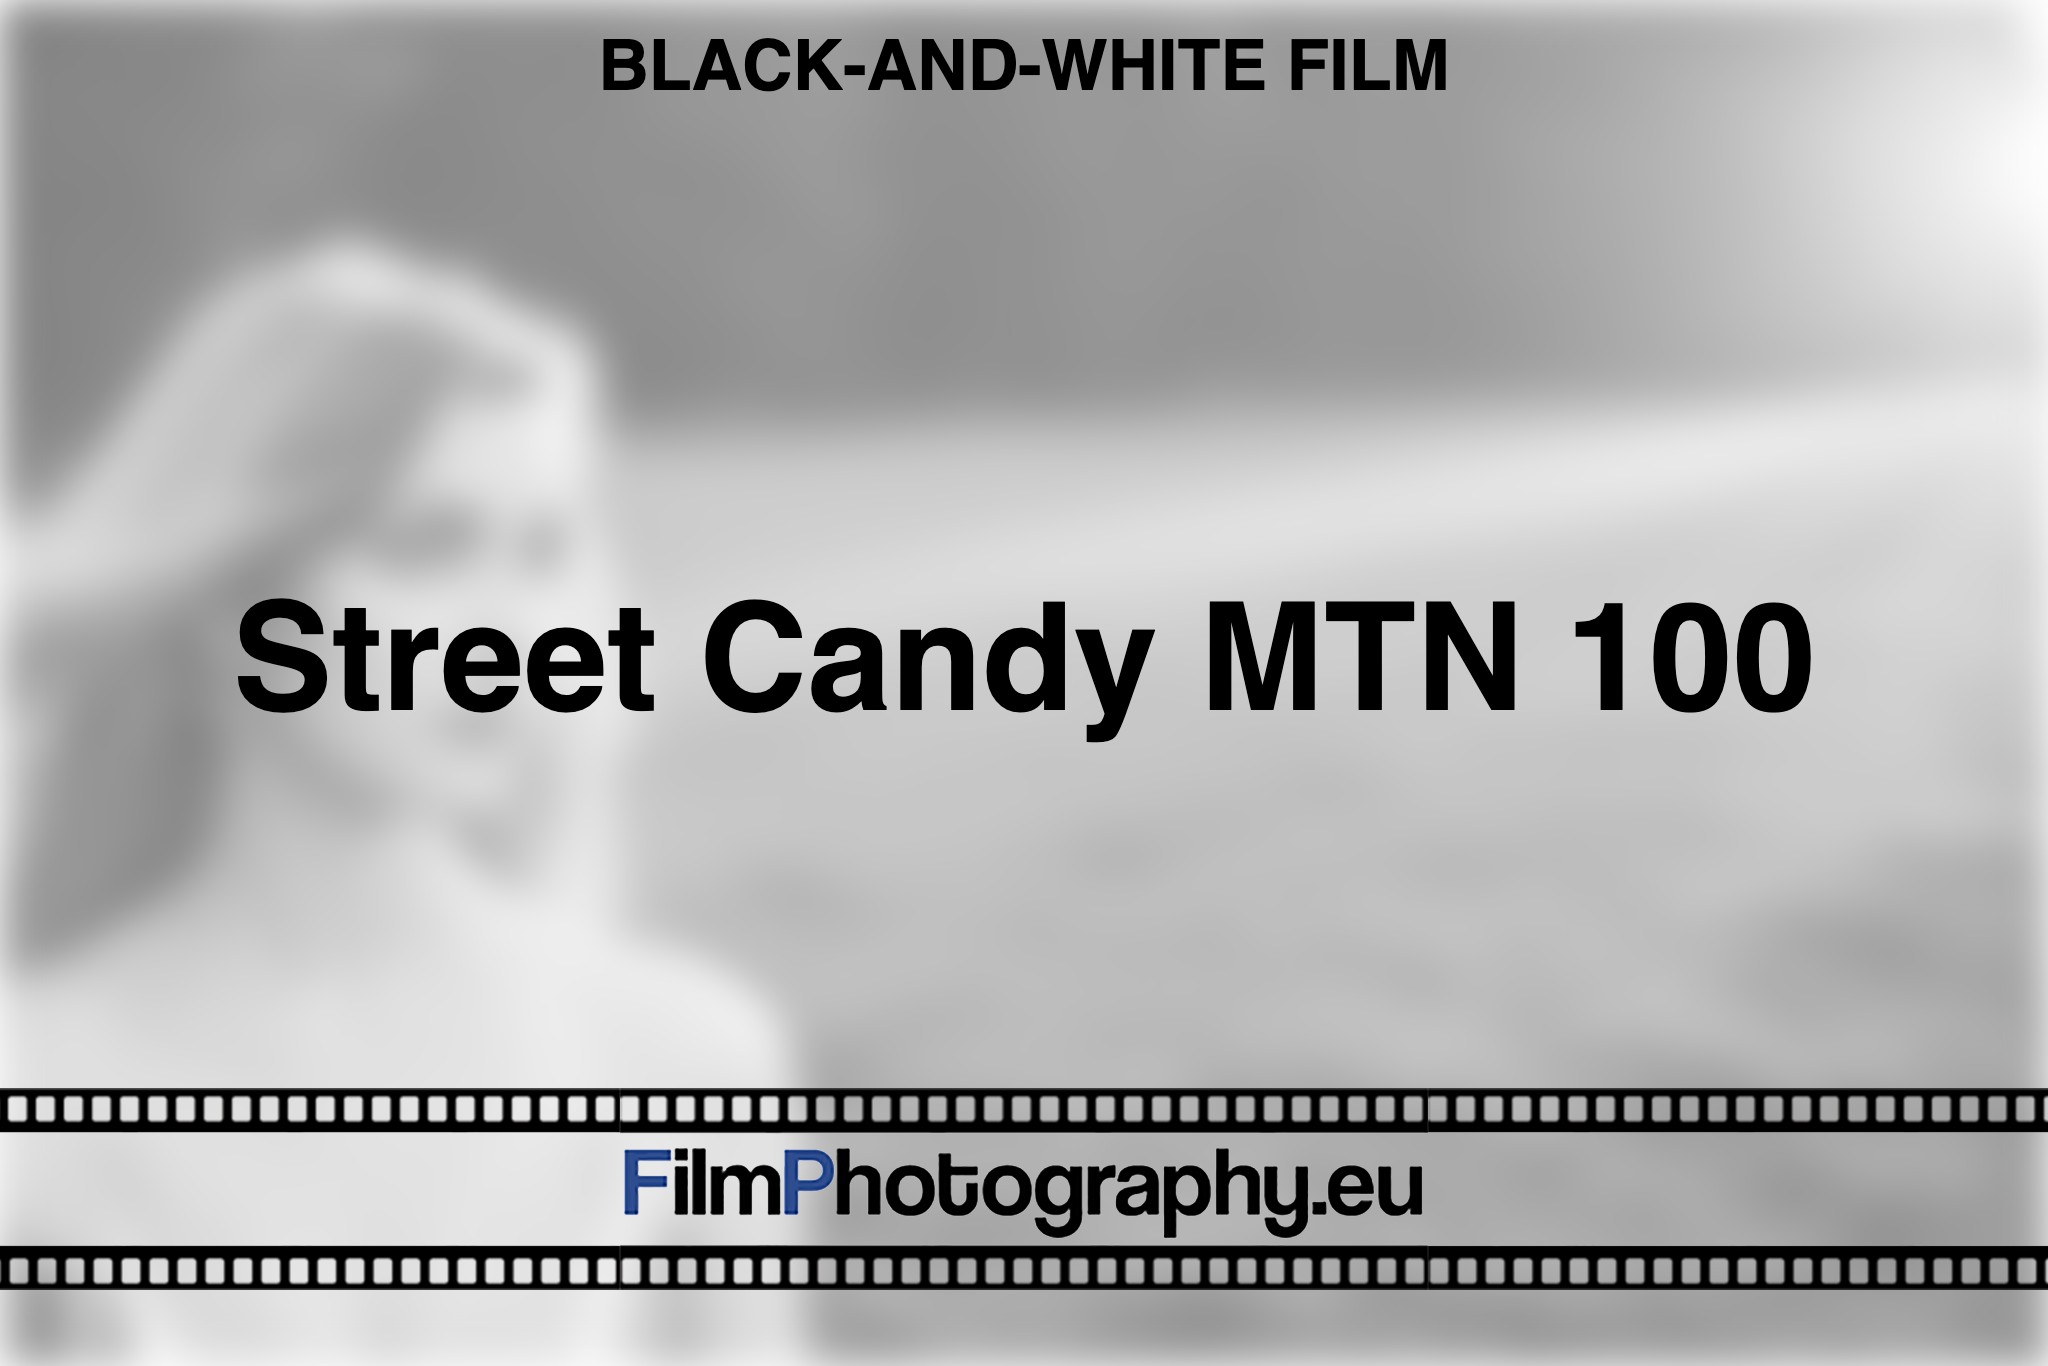 street-candy-mtn-100-black-and-white-film-bnv